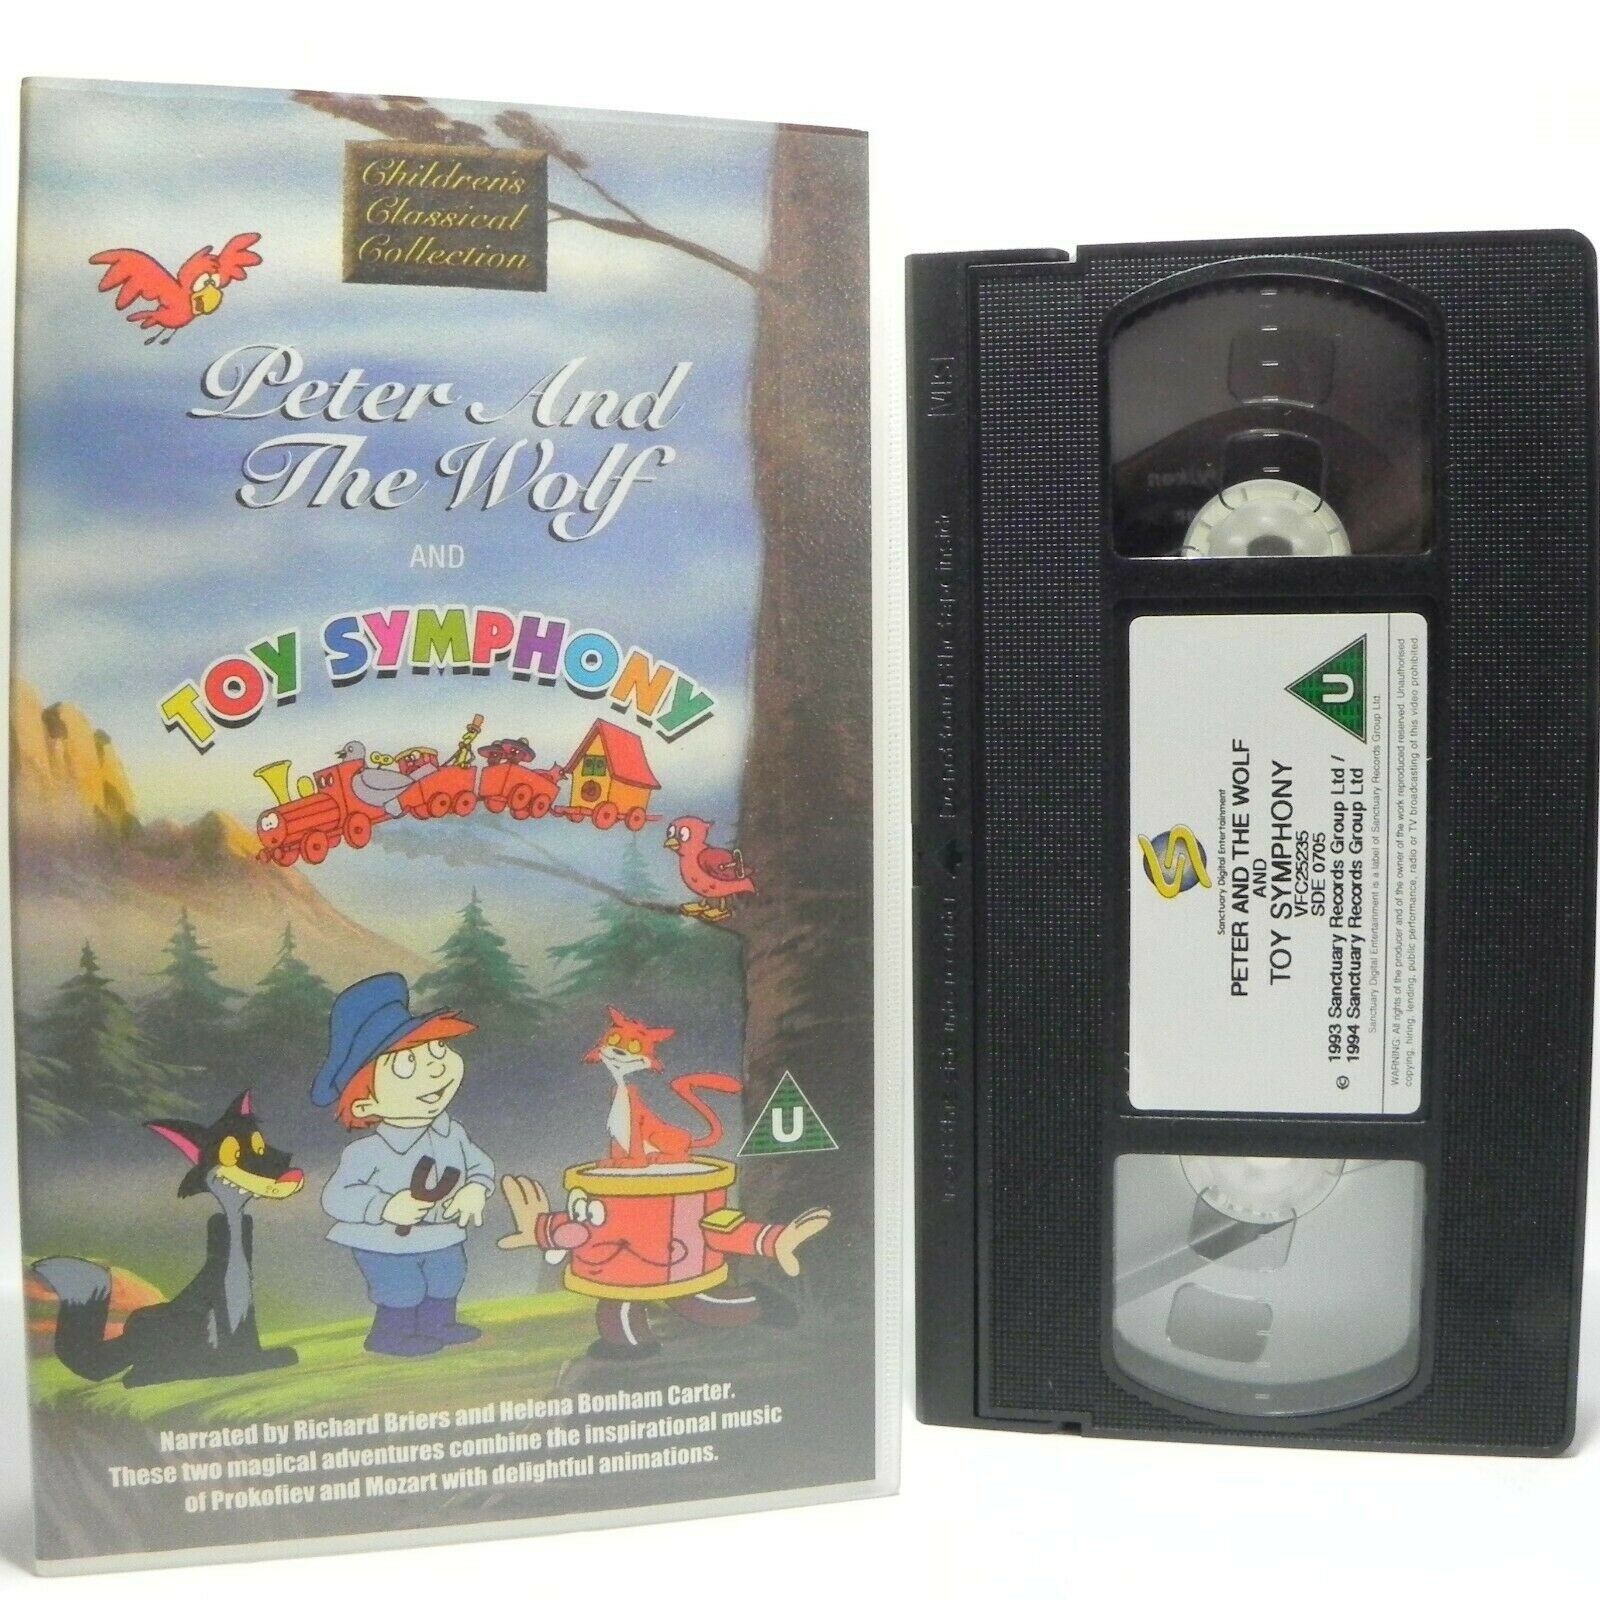 Peter And The Wolf And Toy Symphony - Children's Classical Collection - Pal VHS-